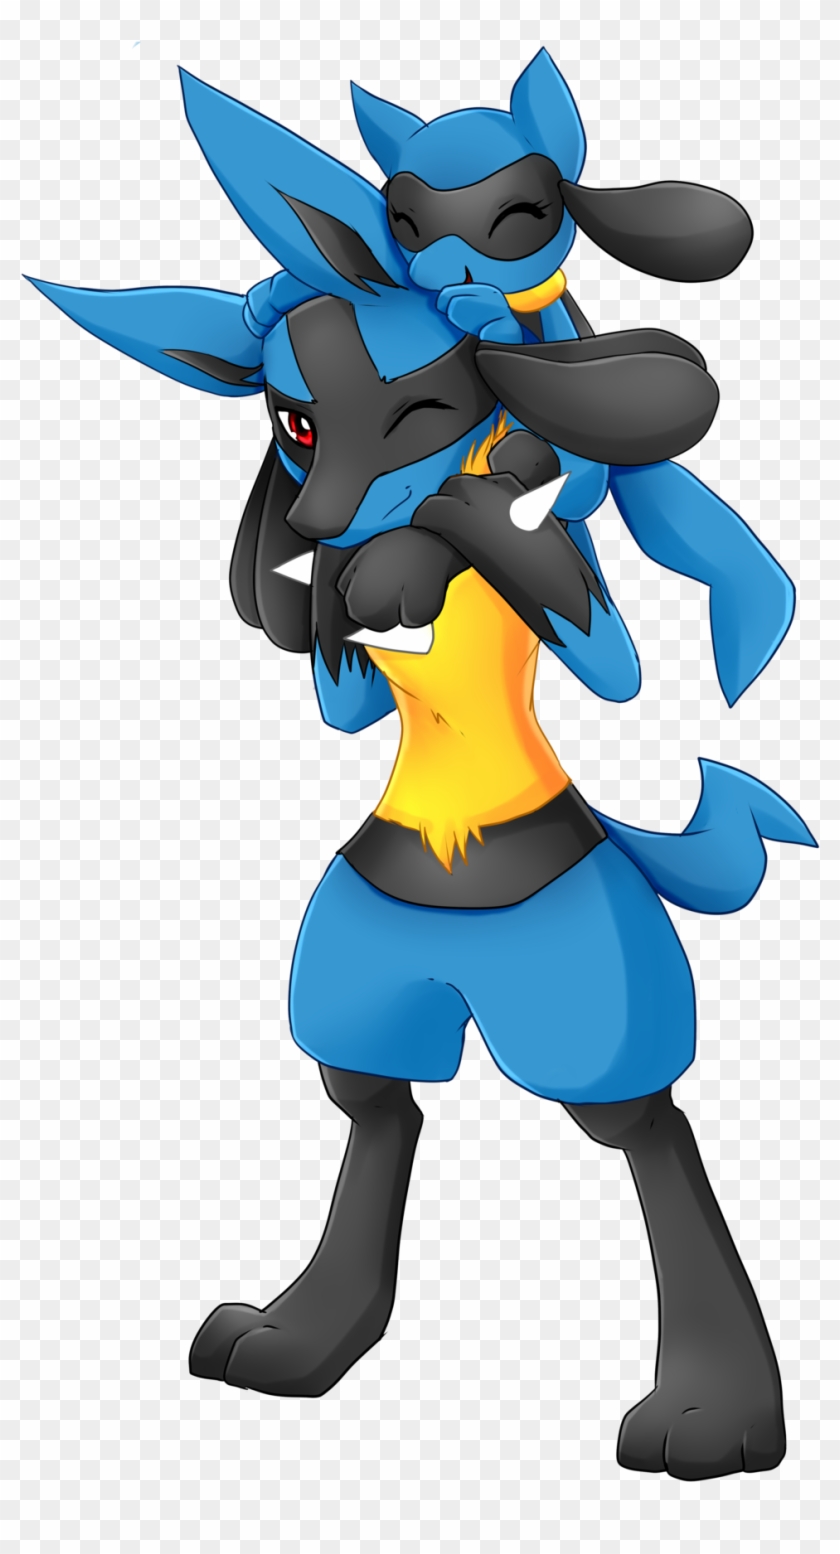 Pokemon Riolu Evolution Images Pokemon Lucario And Riolu Free Transparent Png Clipart Images Download